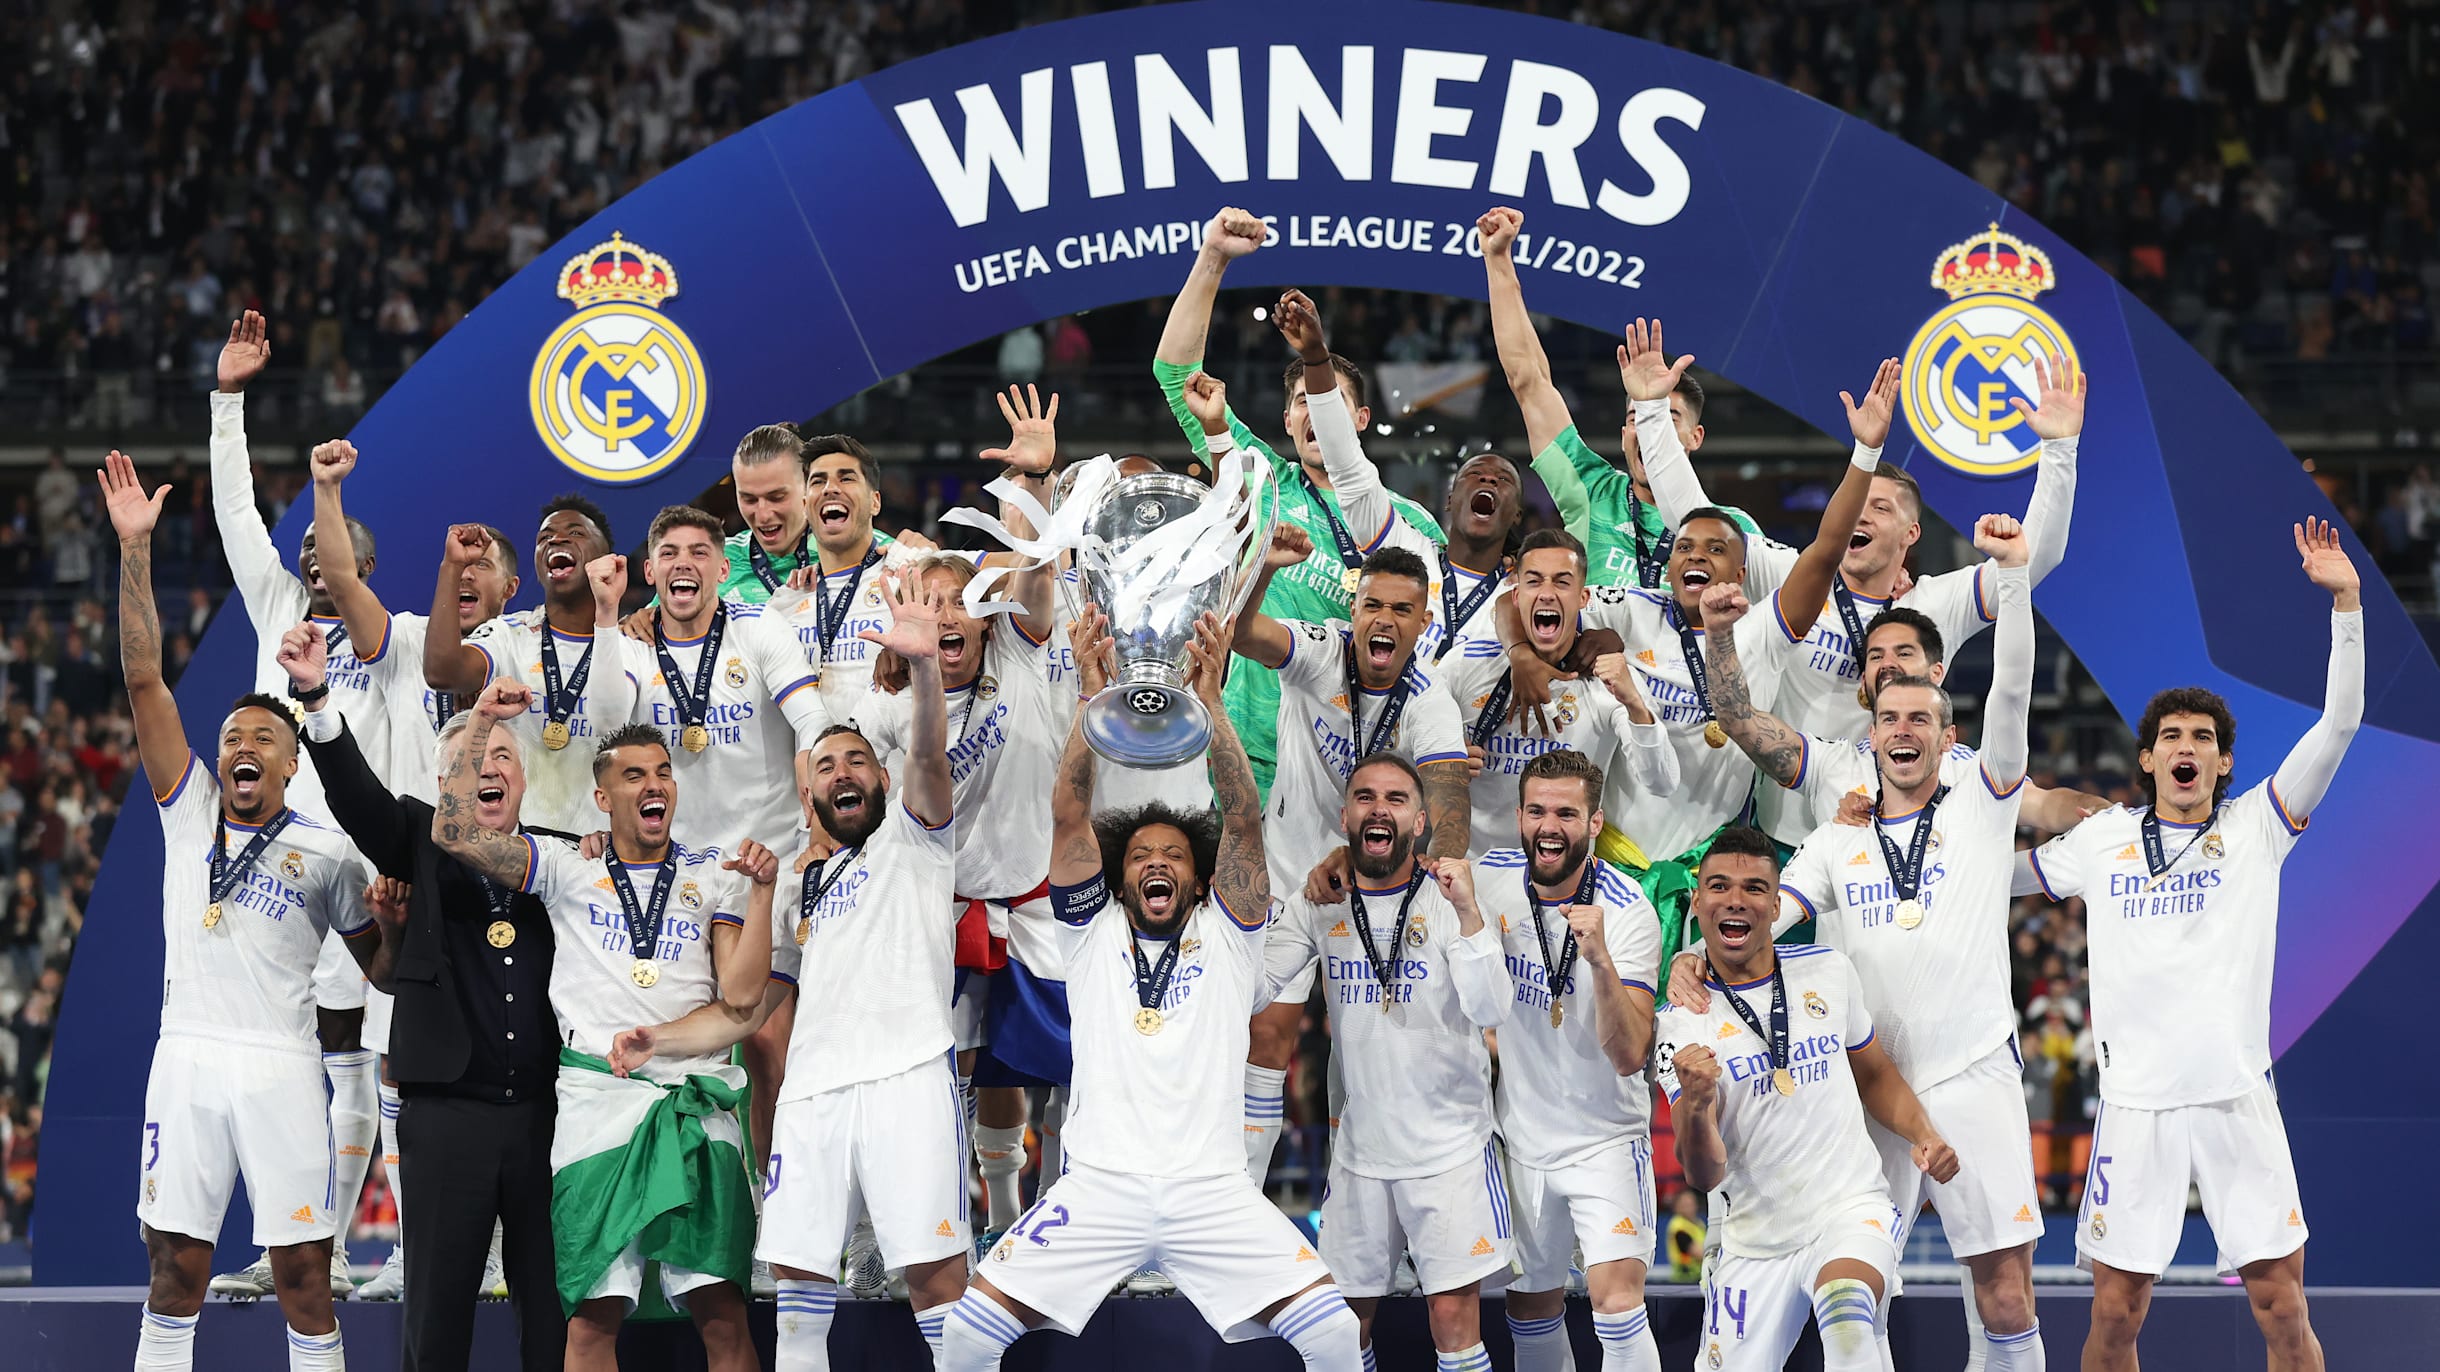 Champions League winners: The complete list